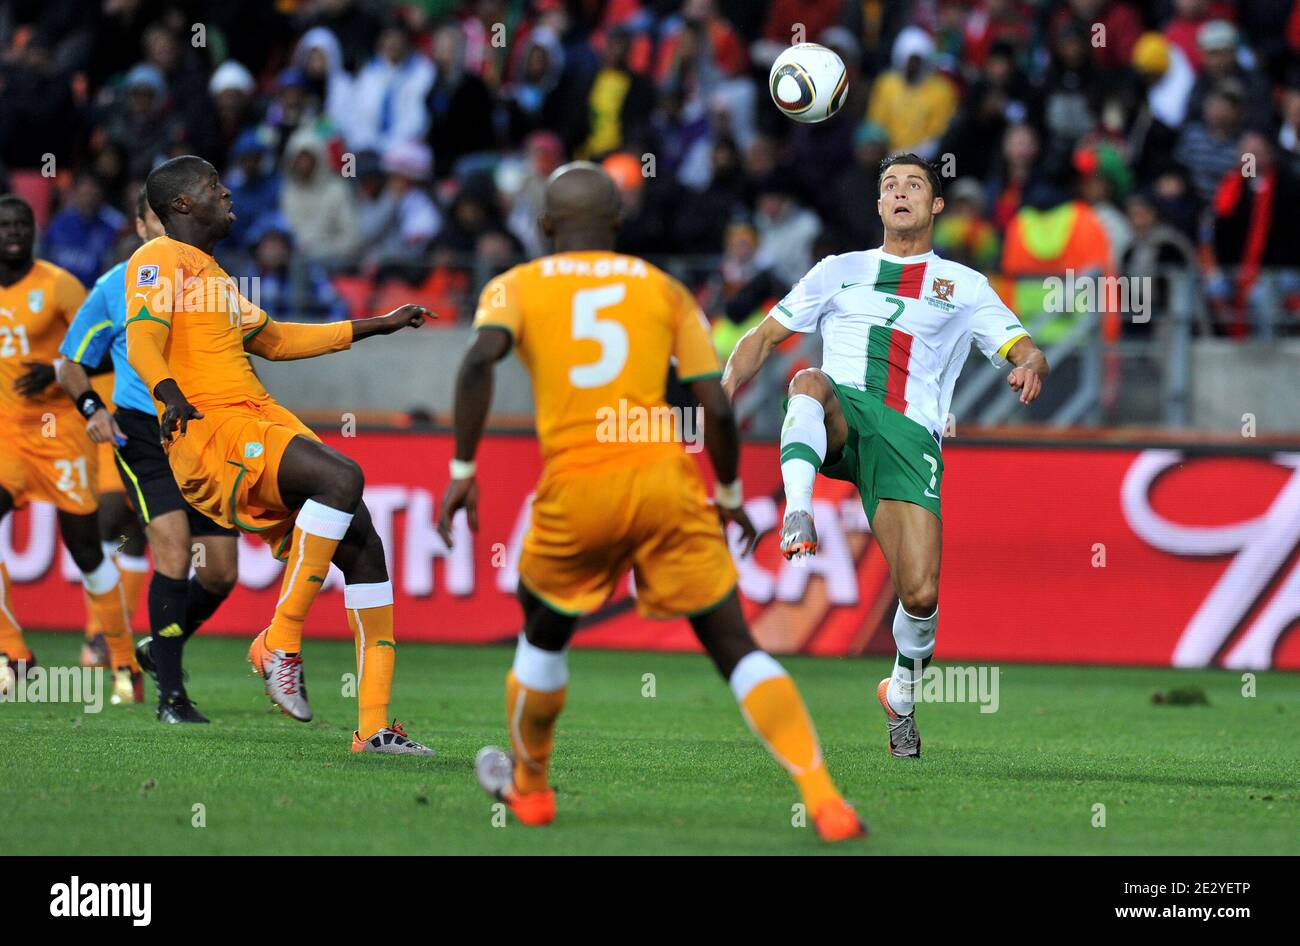 Portugal's Cristiano Ronaldo during the 2010 FIFA World Cup soccer match,  Group G, Ivory Coast vs Portugal at the Nelson Mandela Bay Stadium, in Port  Elisabeth, South Africa on June 15, 2010.